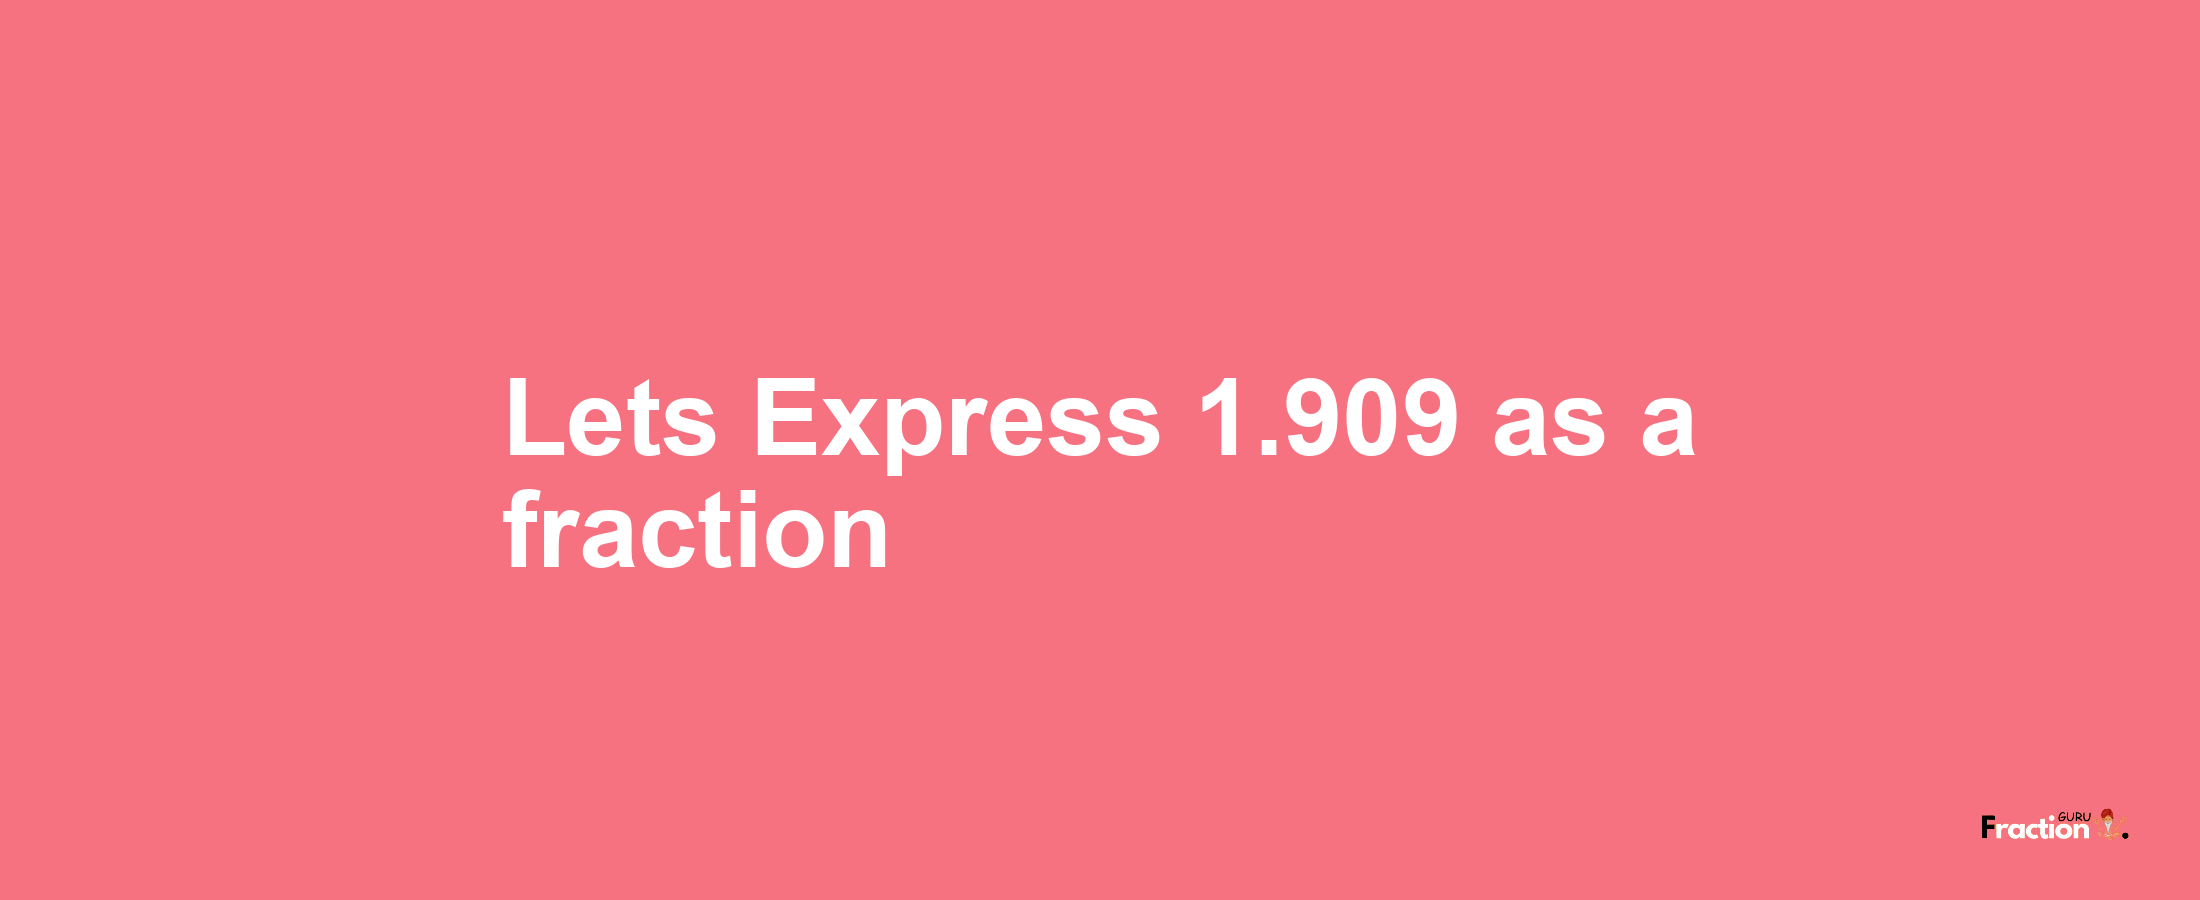 Lets Express 1.909 as afraction